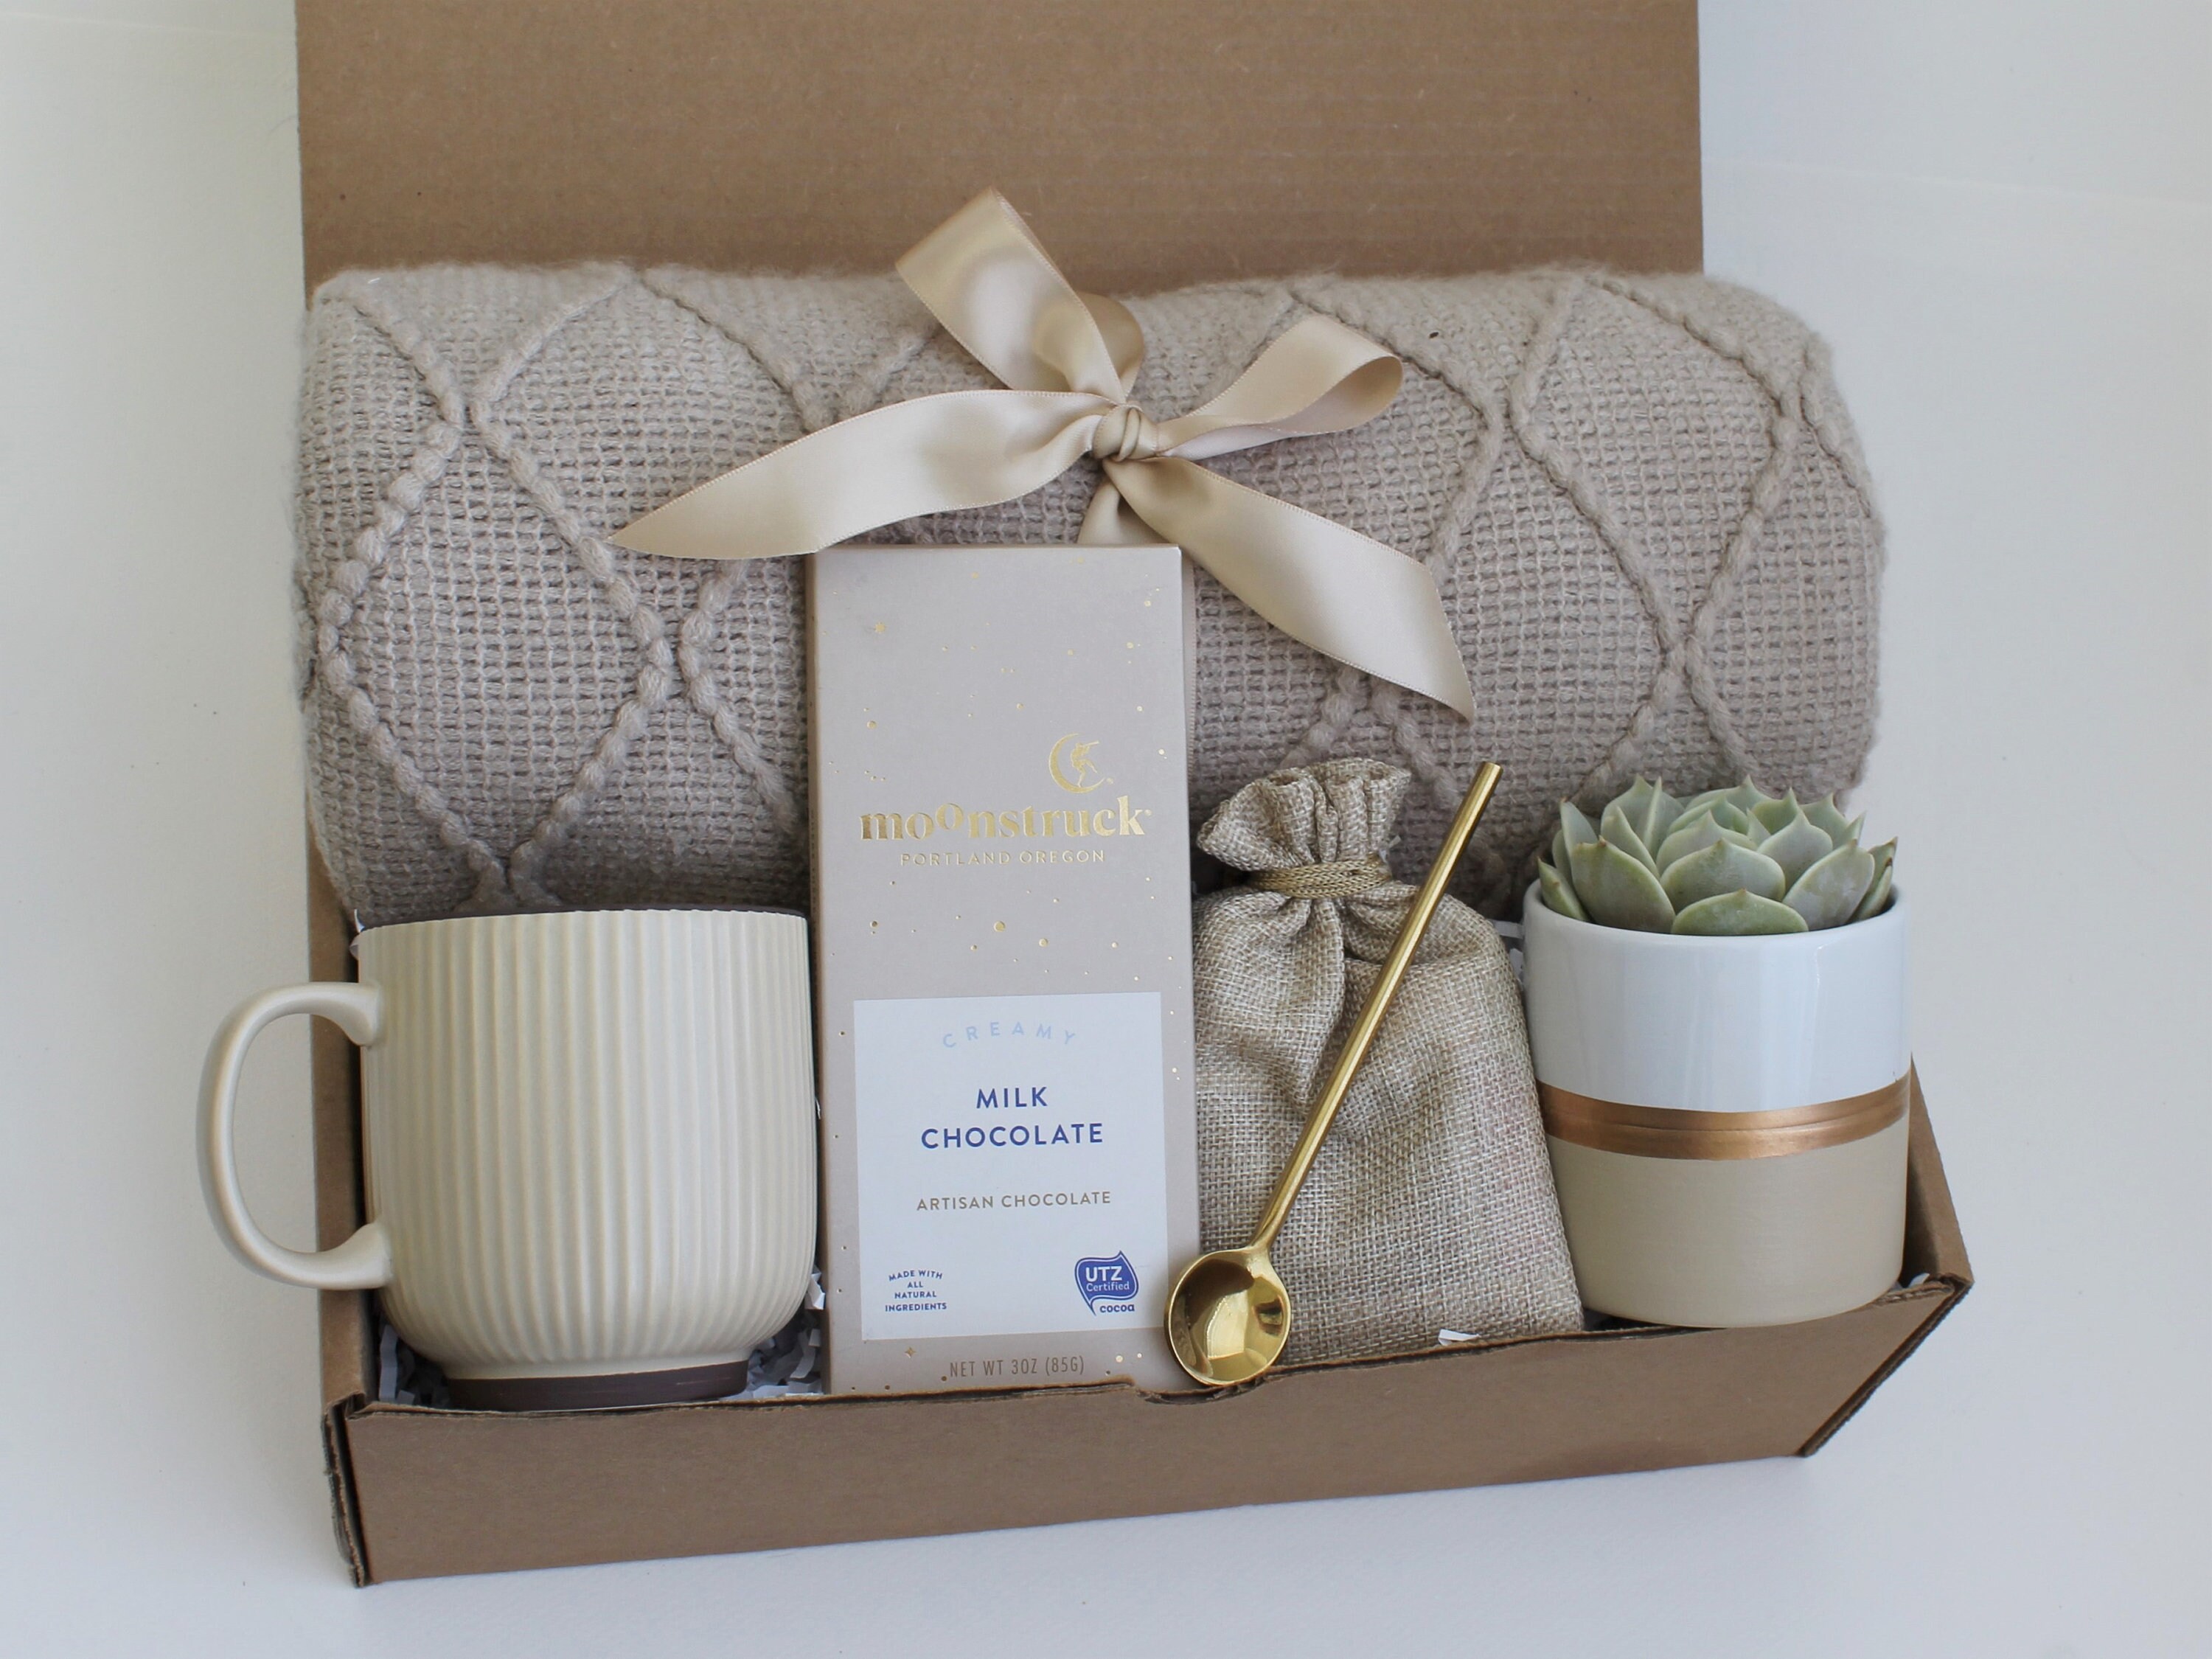 Birthday Gifts for Her, Self Care Gift Box, 50th Birthday Gift for